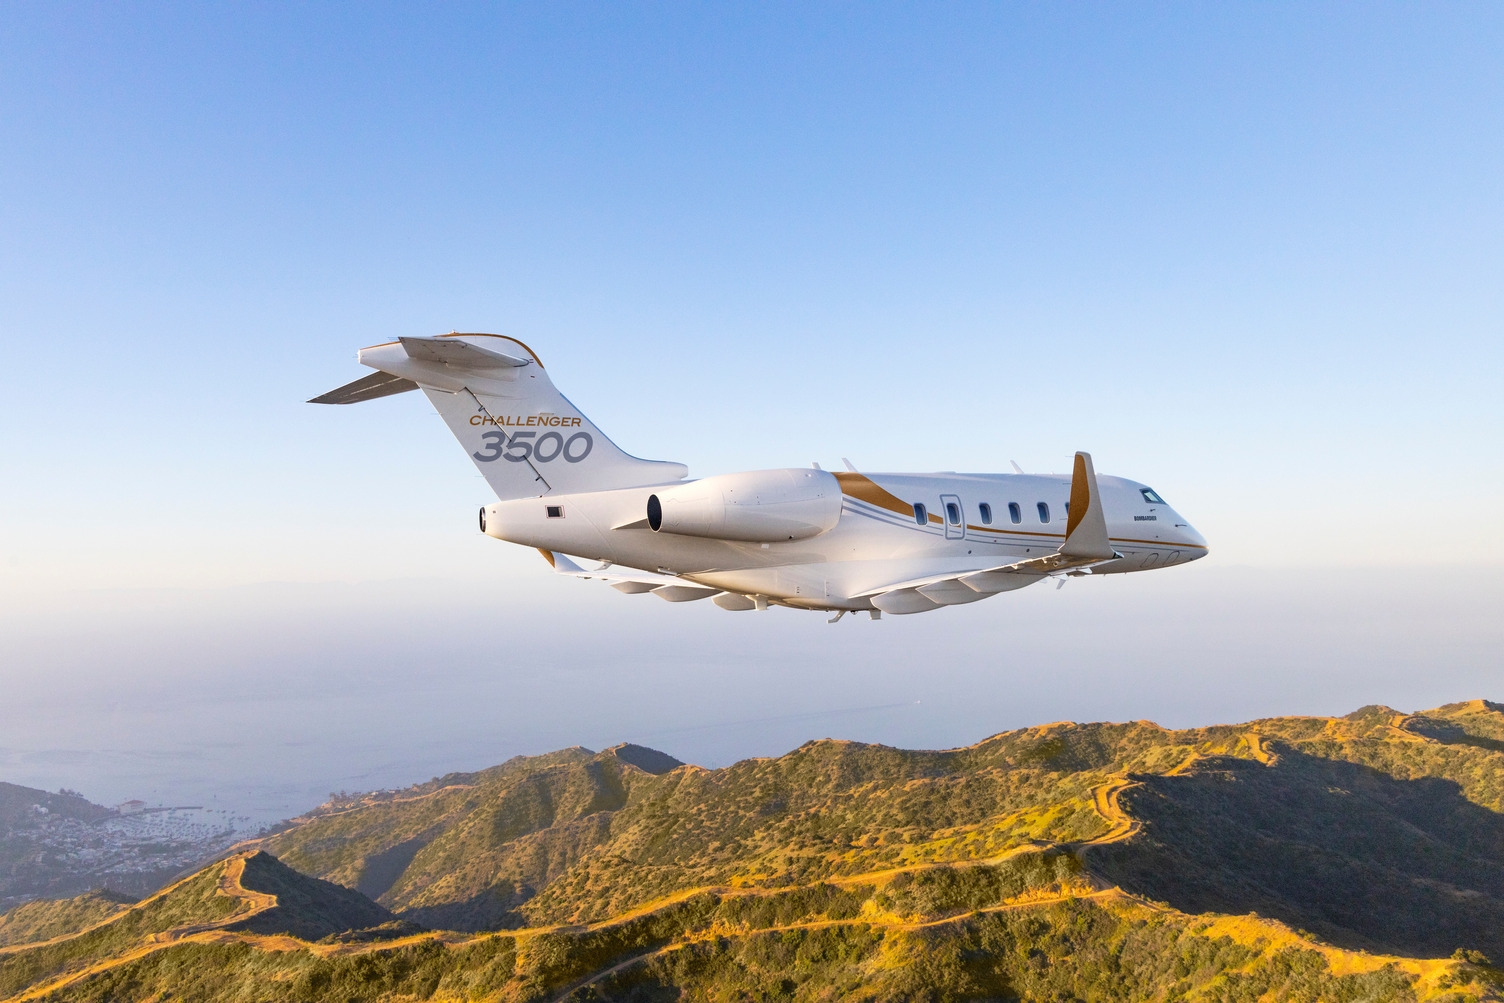 Challenger 3500 private jet